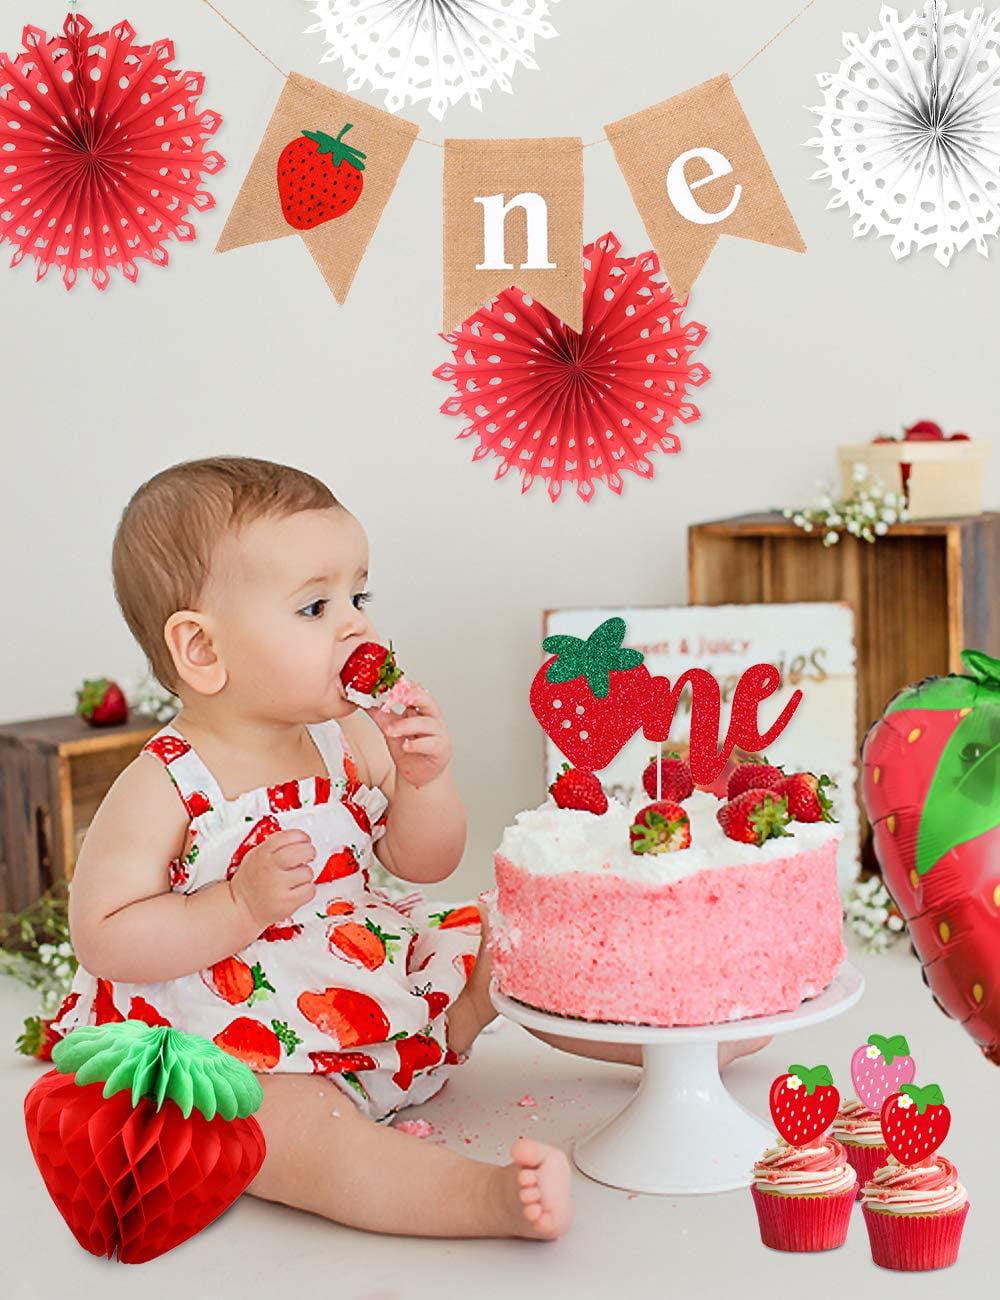 MEHOFOND Strawberry Theme 1st Birthday Party Decoration Backdrop for 1 Years Old Girl A Berry Sweet One Photography Background Cake Table Gift Table Photo Props Banner Supplies Vinyl 7x5ft 